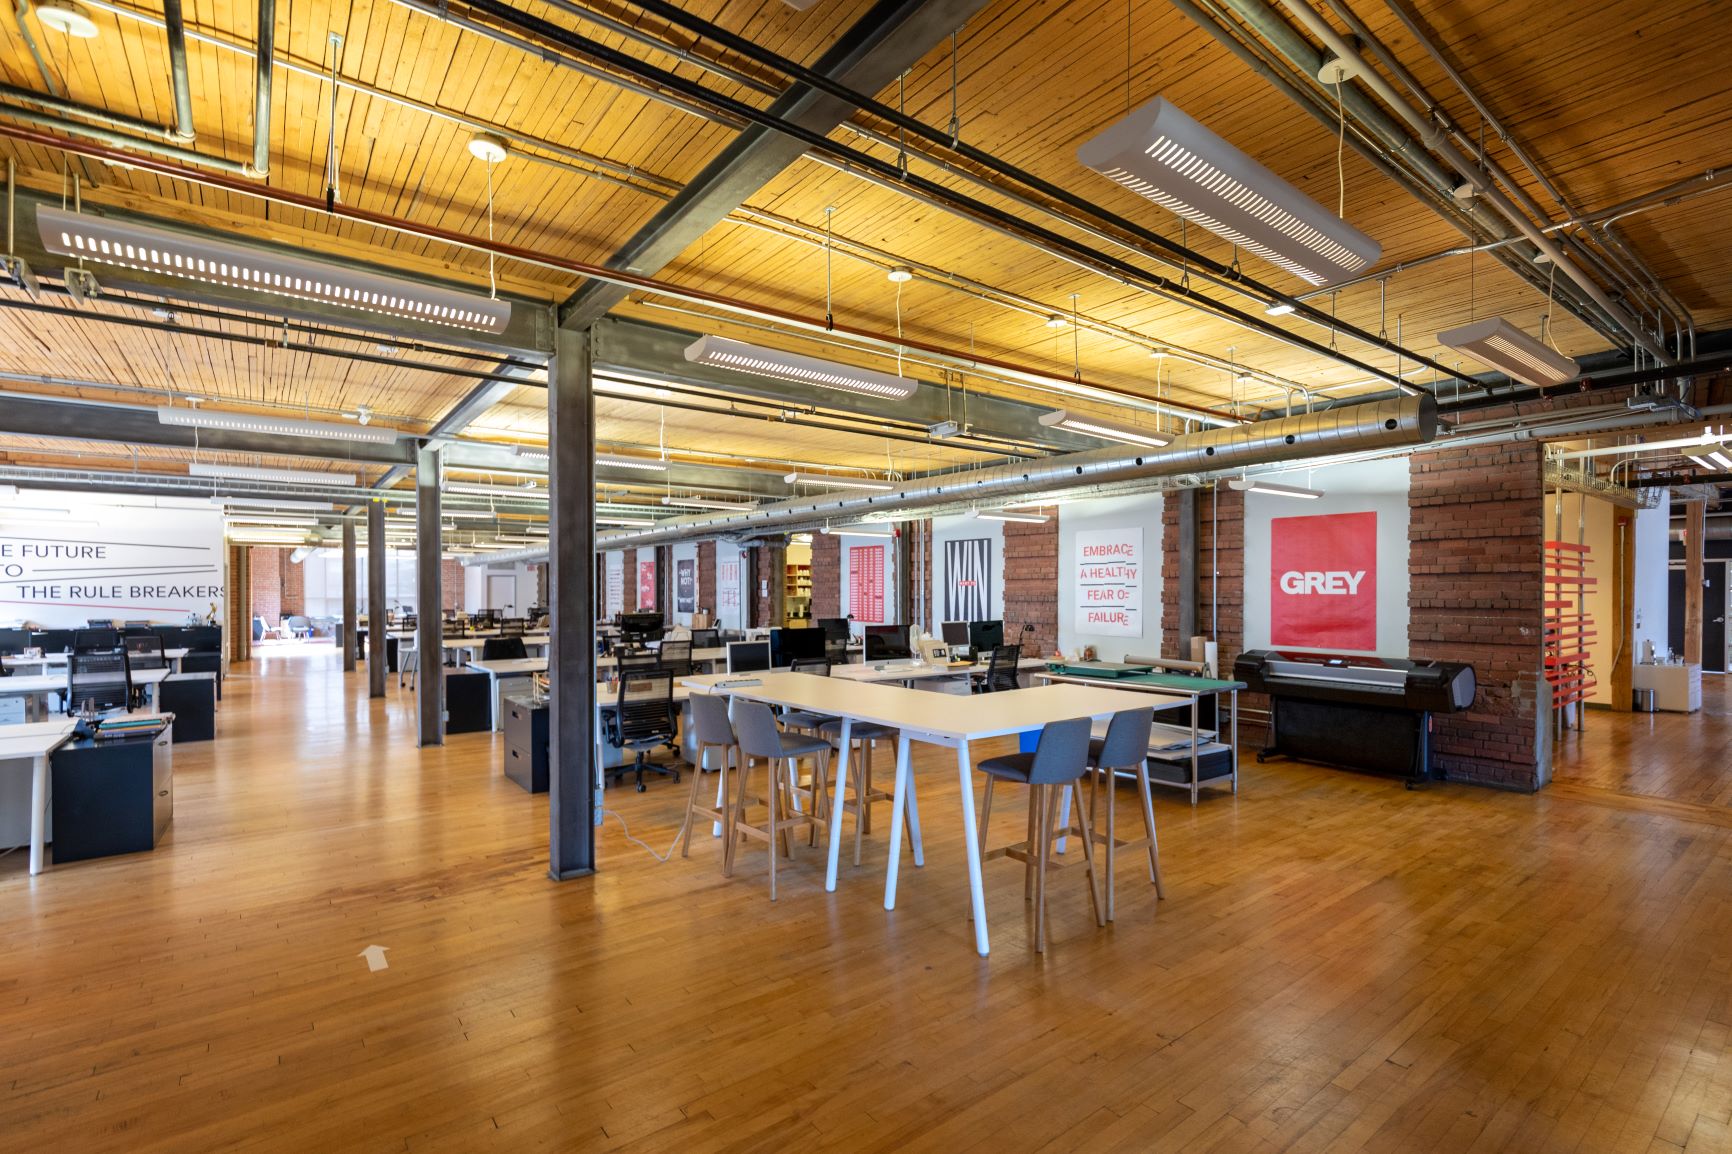 The Systems building loft office interior with brick and beam architecture